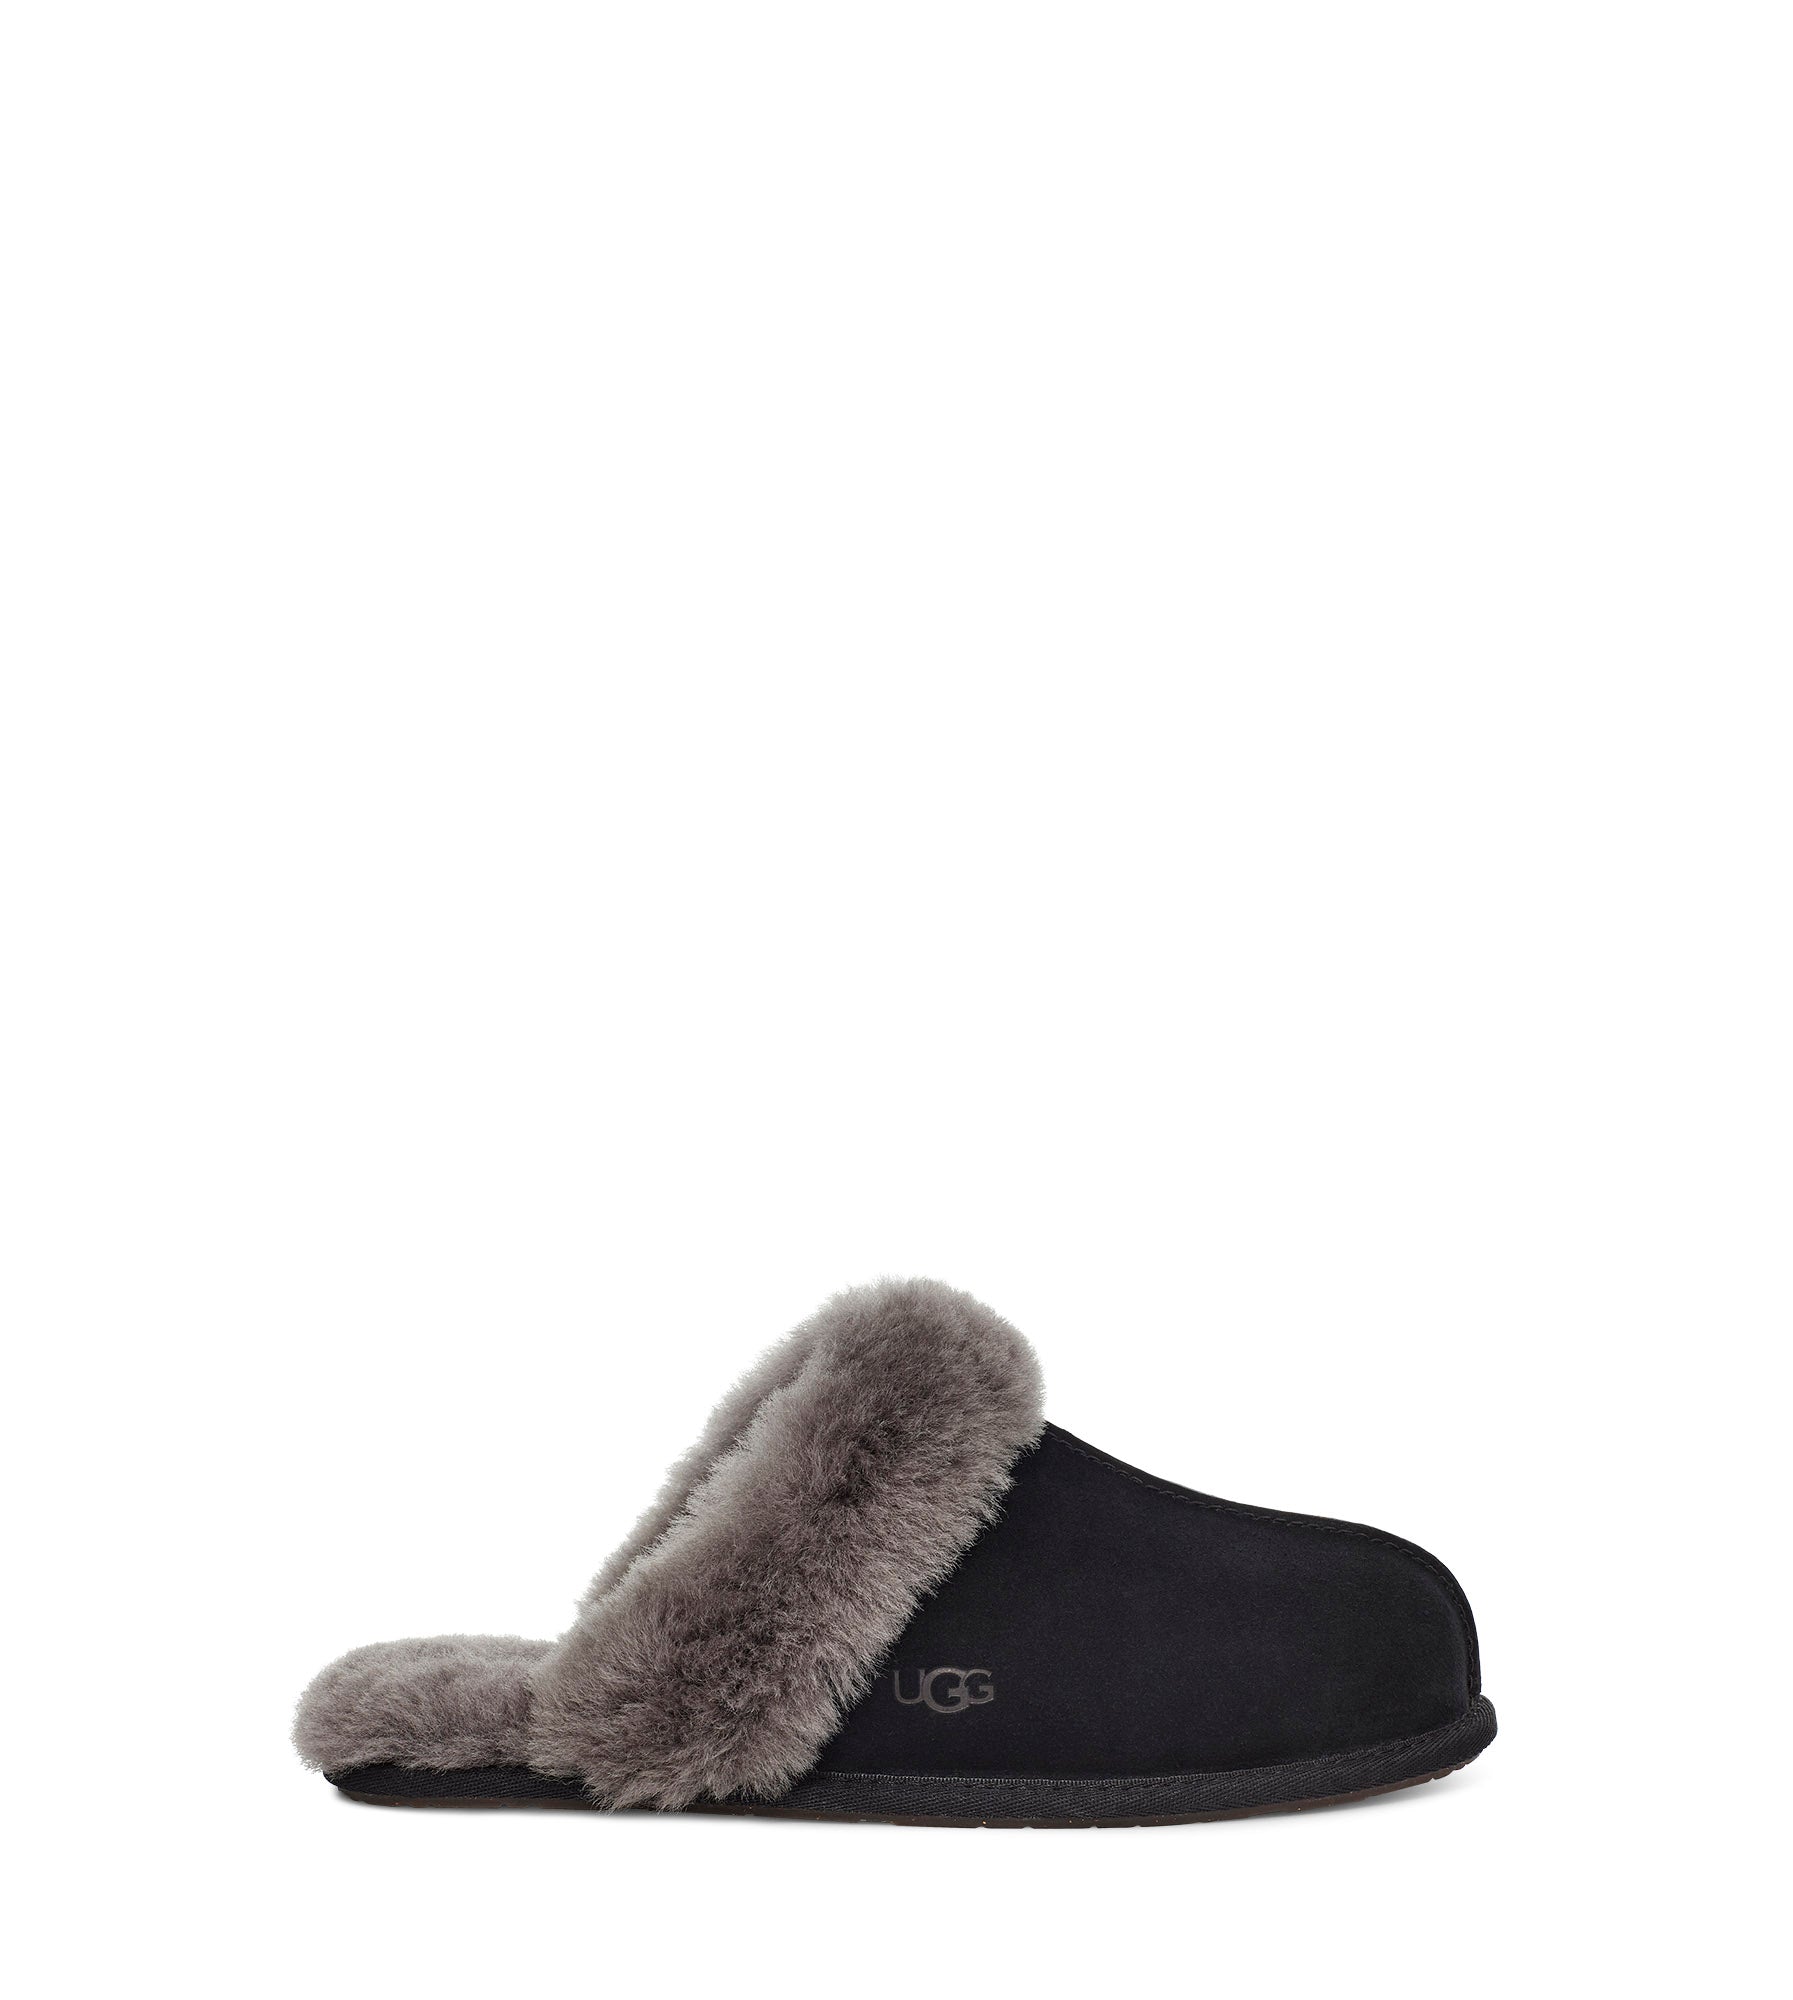 The Women's Ugg Scuffette 2 is an essential house slipper cast in soft suede with plush wool lining. Pair with our cozy robes or matching cashmere sets for maximal leisure.  This is the best-selling Black/Grey colorway.